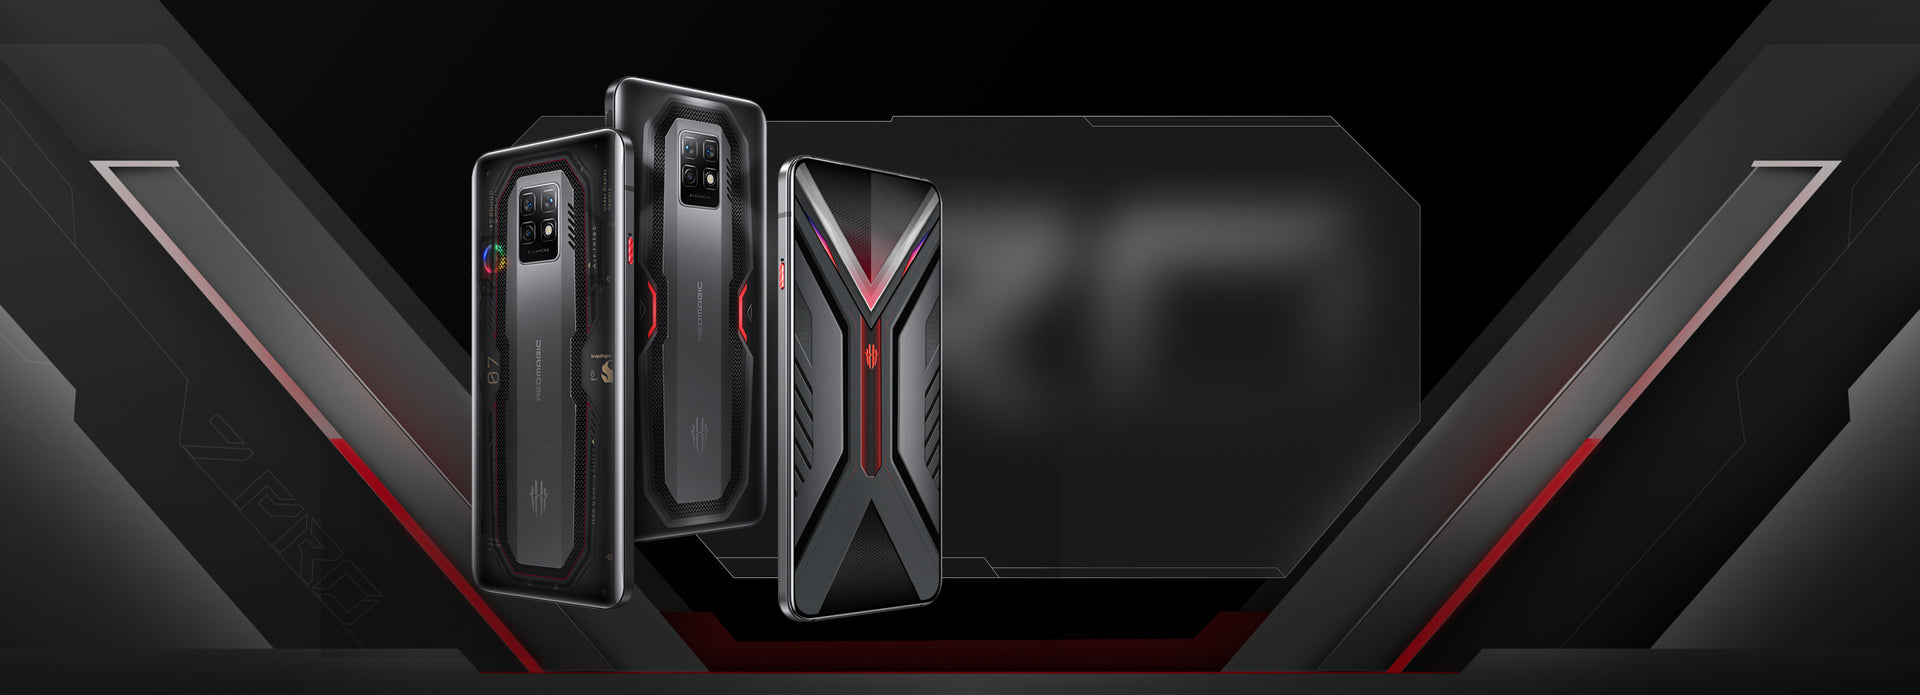 REDMAGIC 7 Gaming Smartphone - Product Page - REDMAGIC (US and Canada)